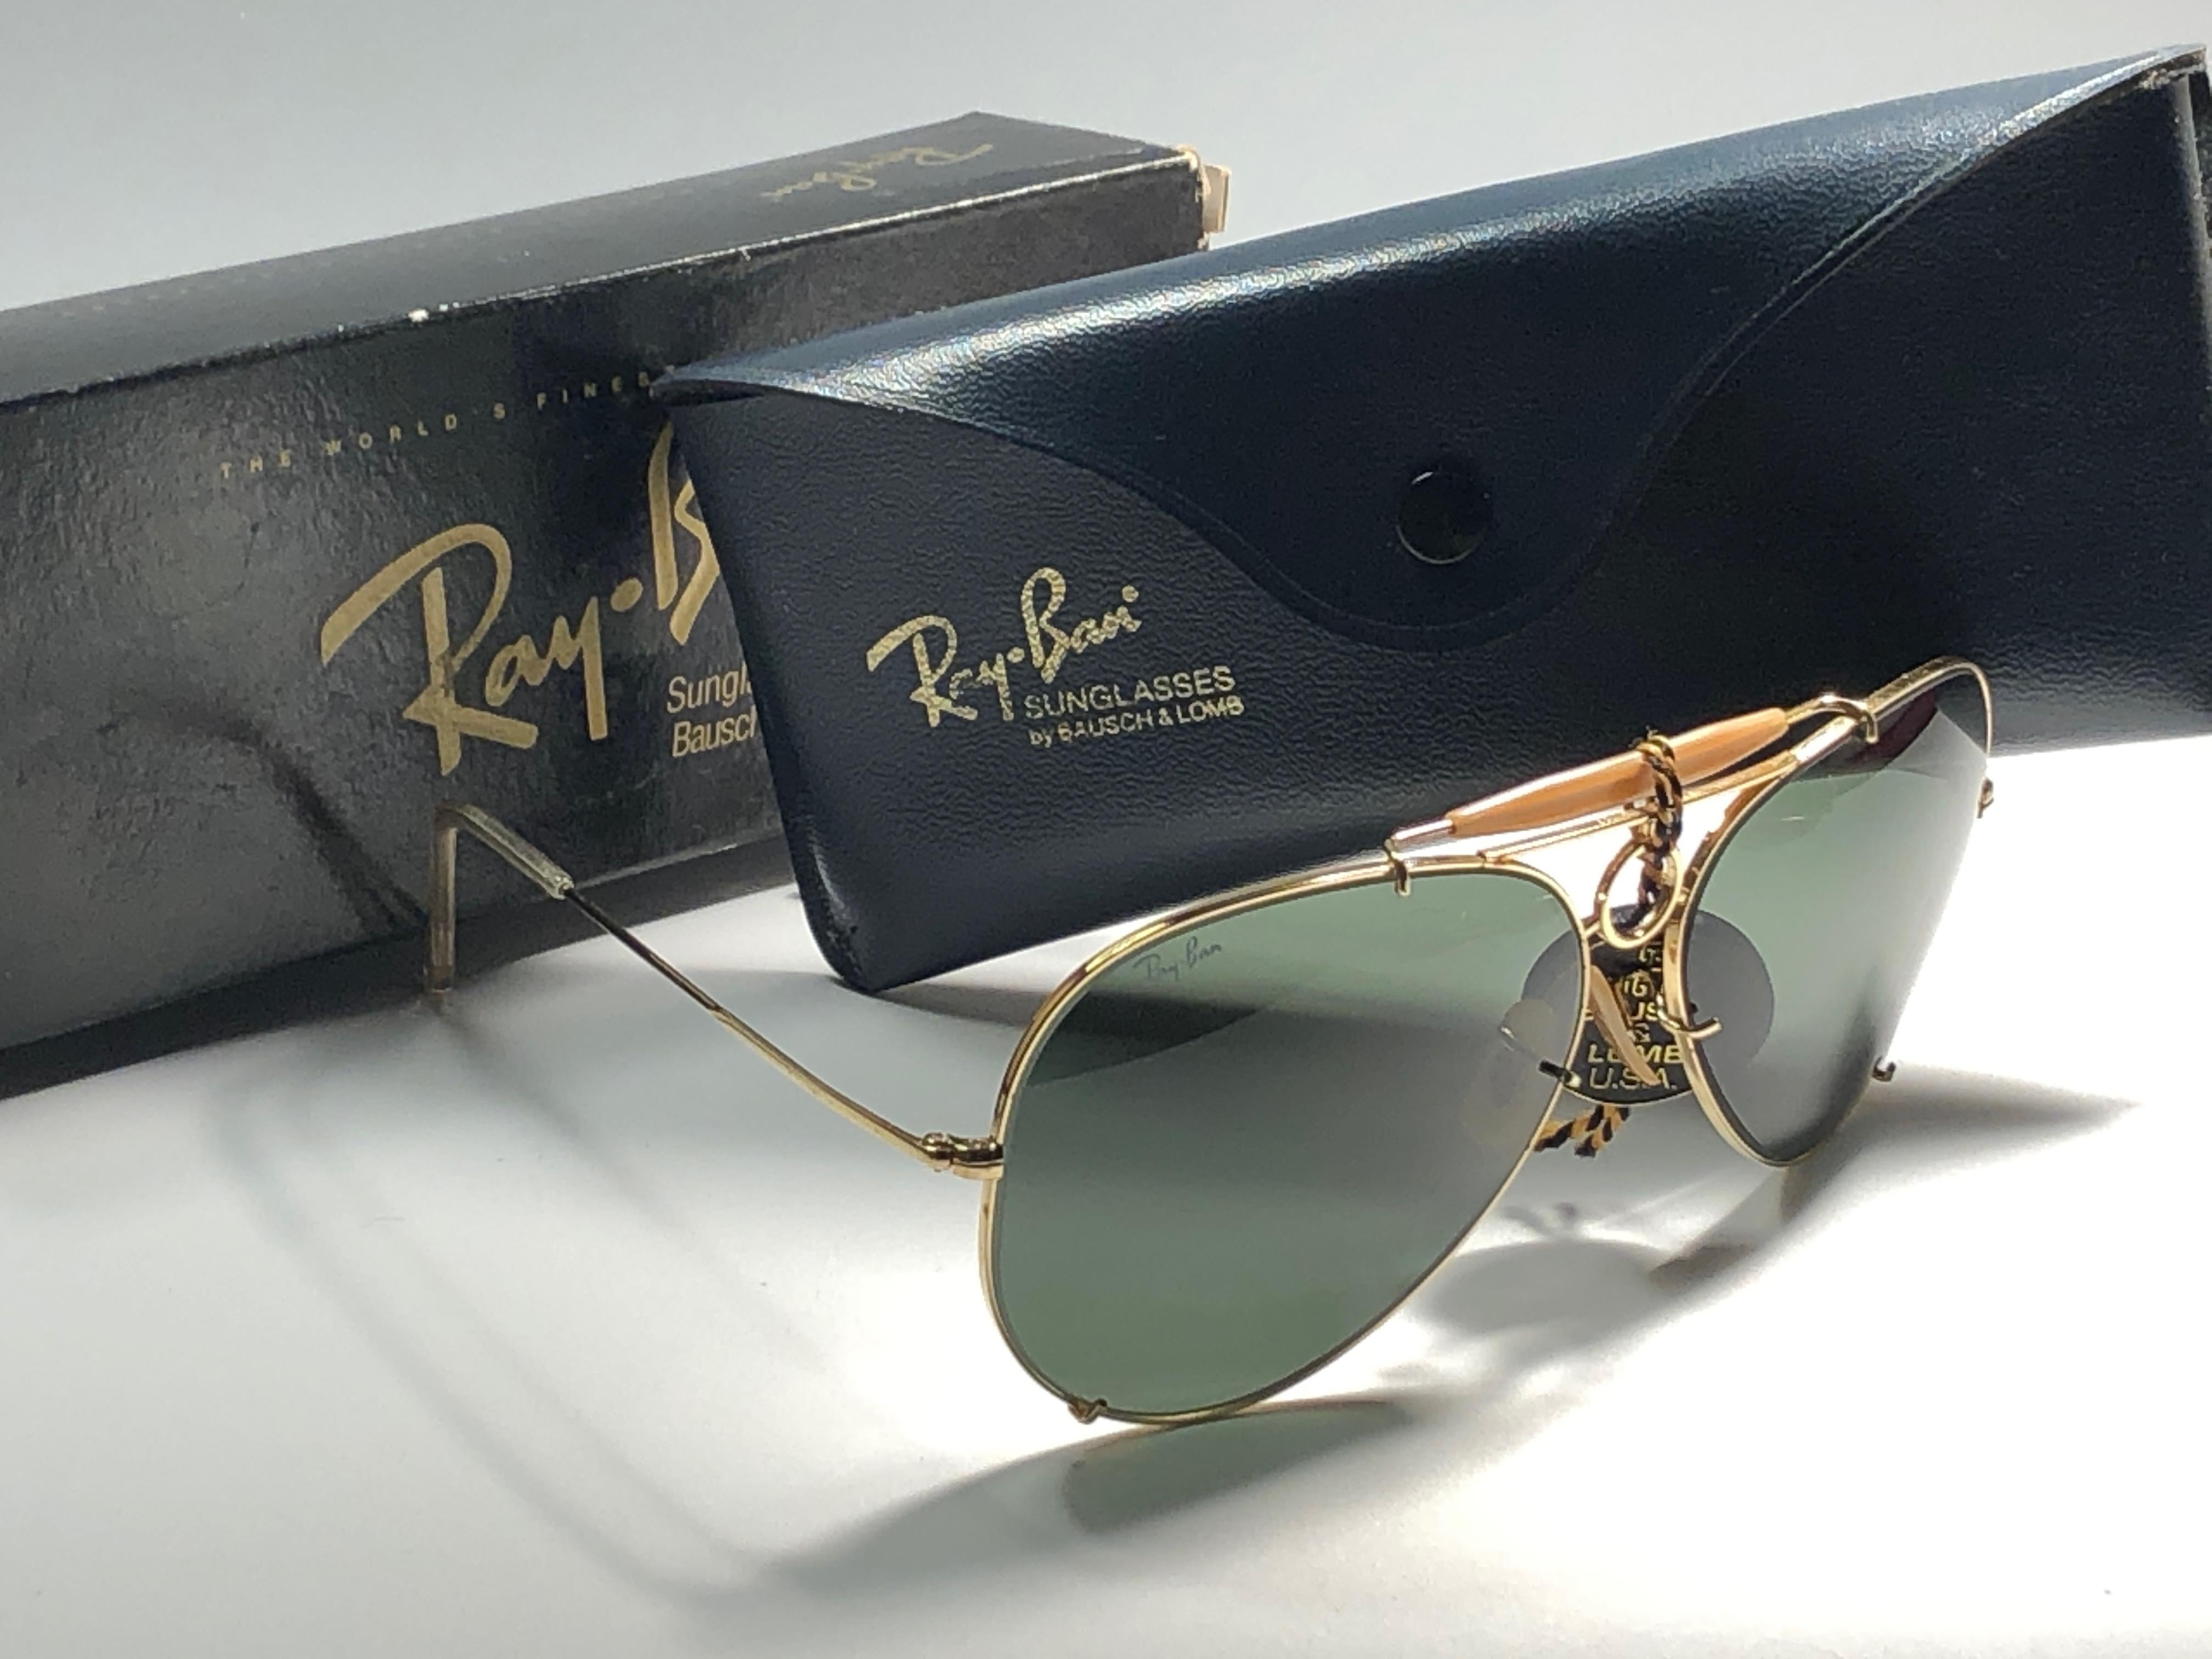 Vintage Ray Ban Shooter 65MM the largest available with G15 grey Lenses.


Light sign of wear due to storage. Original Ray Ban B&L case and carton box.

A true rarity.